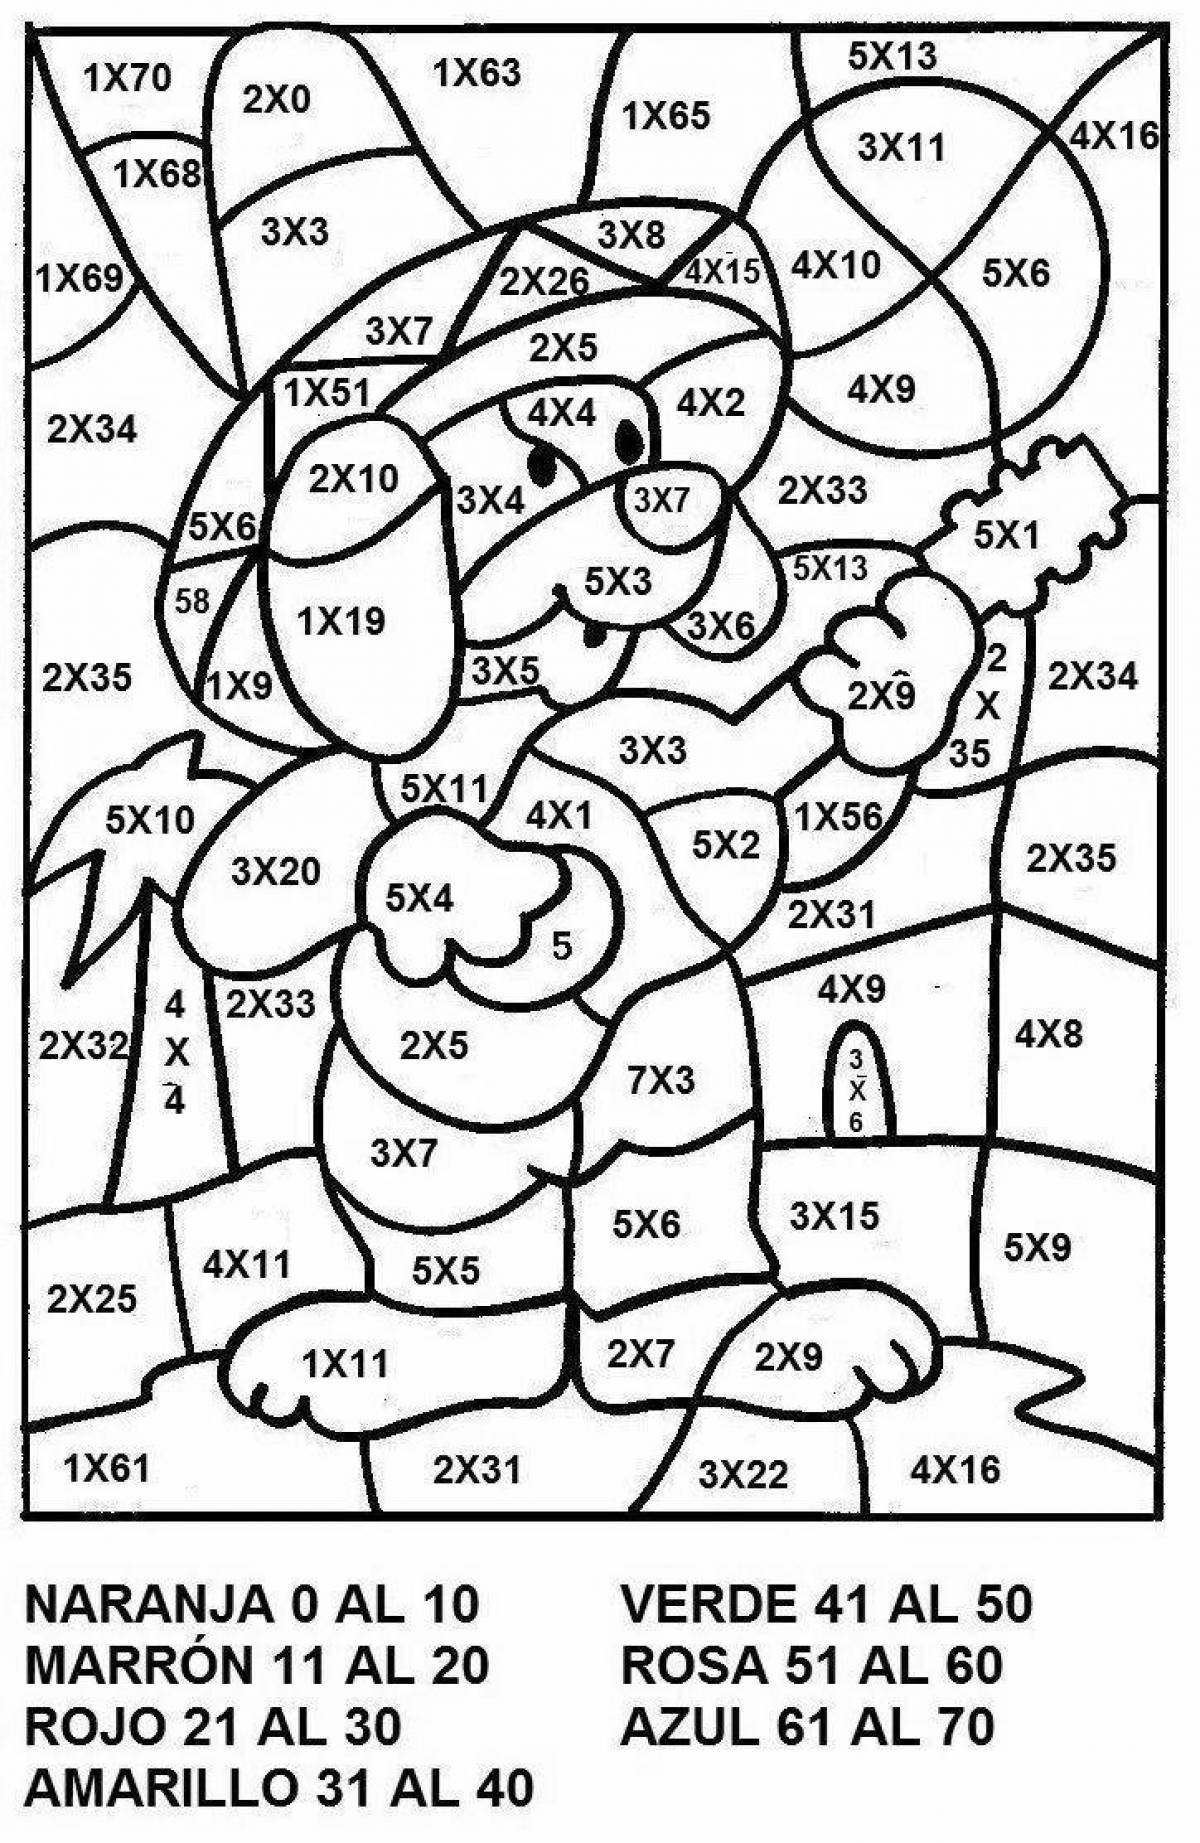 Fun math class 4 coloring page up to 1000